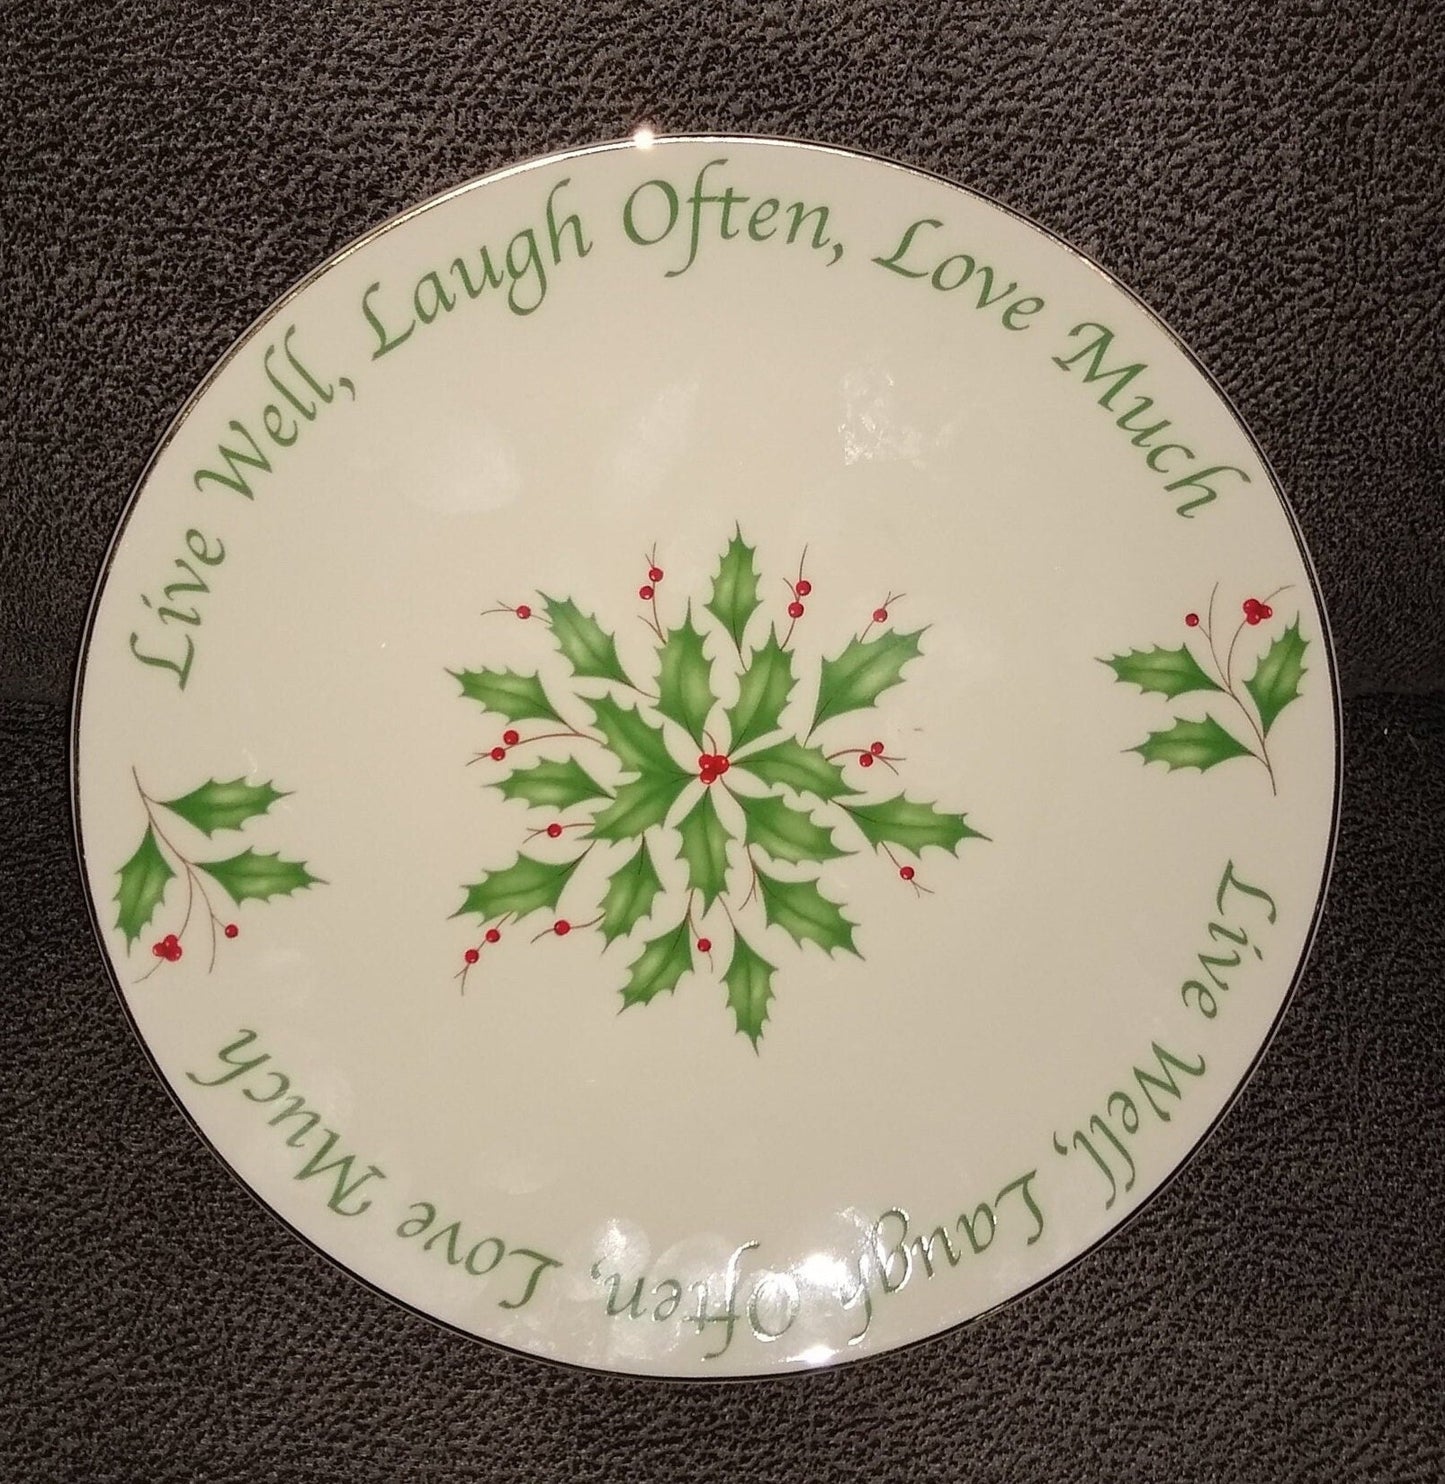 Lenox Christmas Holiday Plate With Green Holly And Red Berries. Live Well, Laugh Often, Love Much. 1970's.